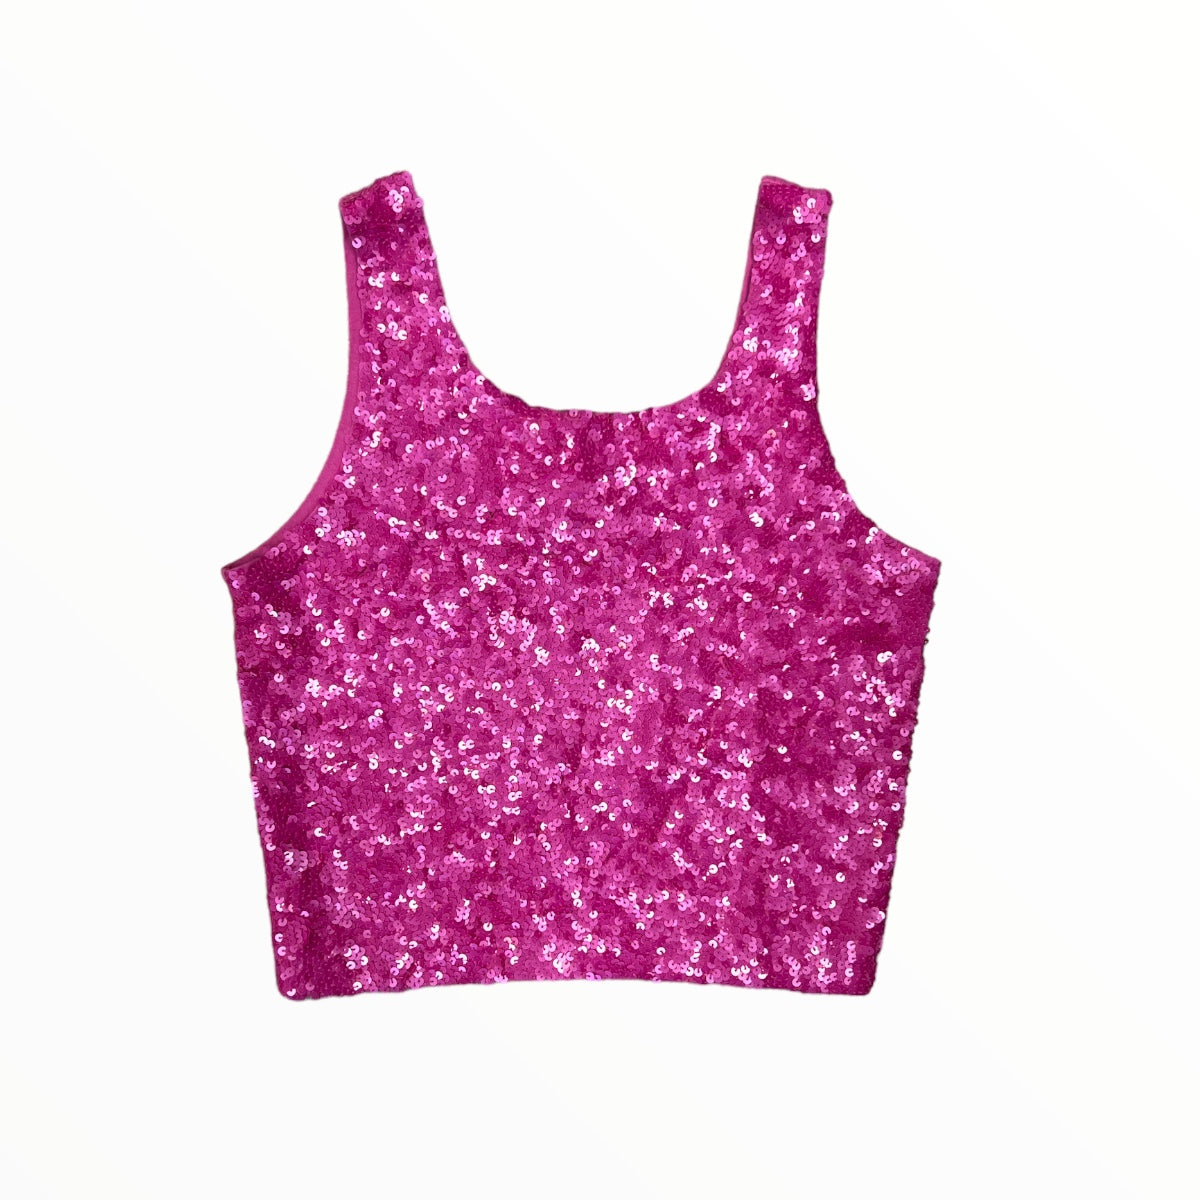 FLOWERS BY ZOE SEQUIN TANK - PINK